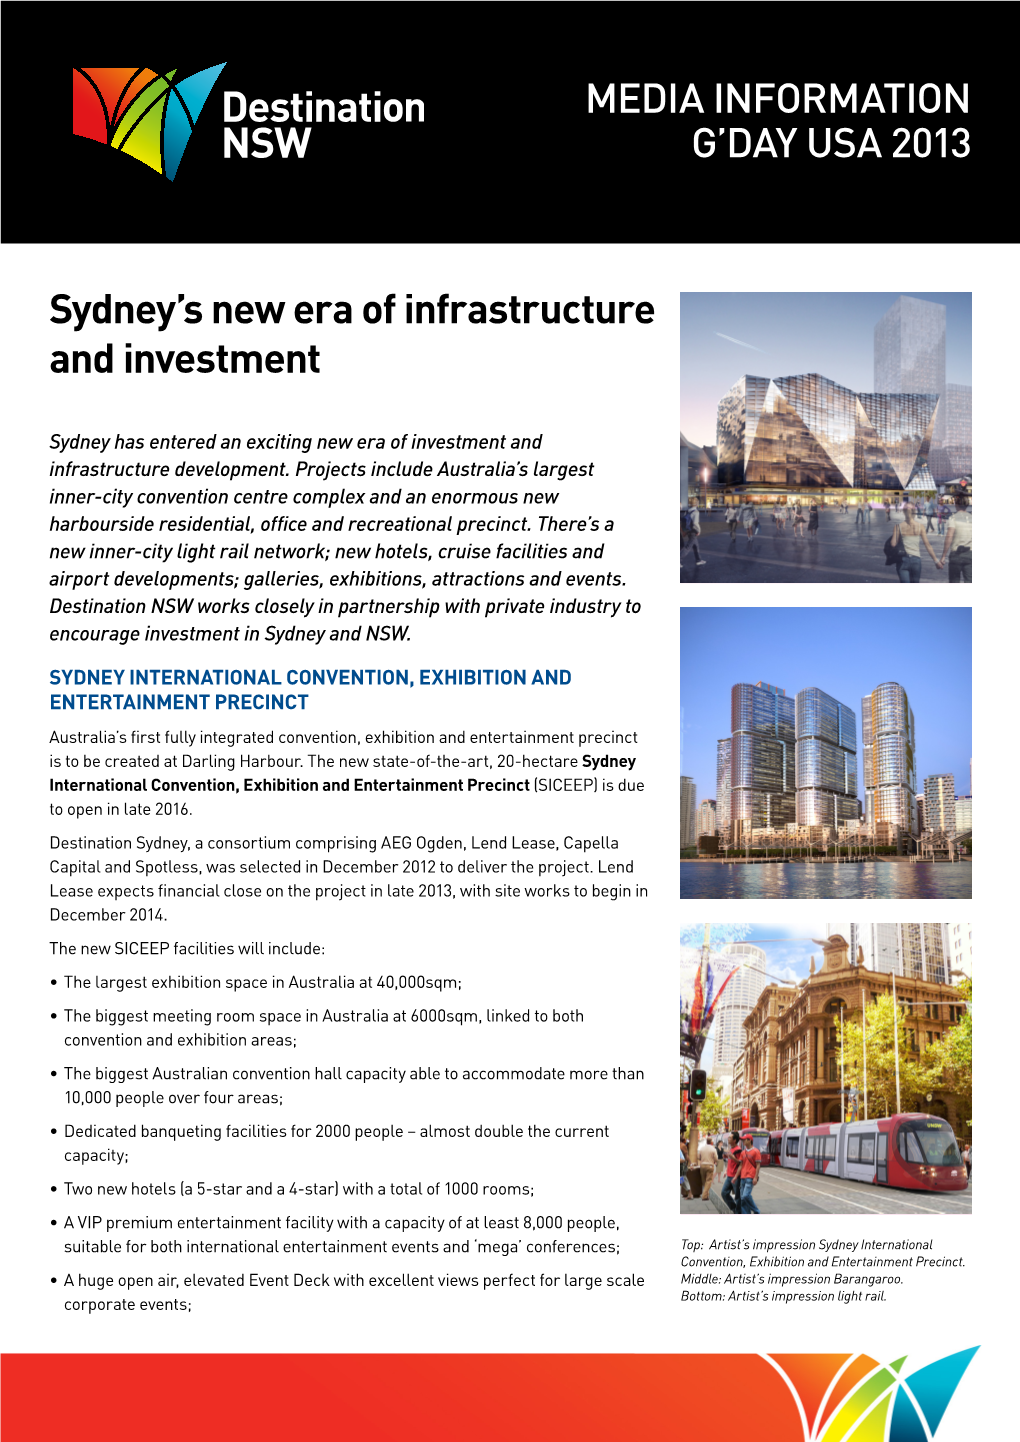 Destination NSW Sydney's New Era of Infrastructure and Investment